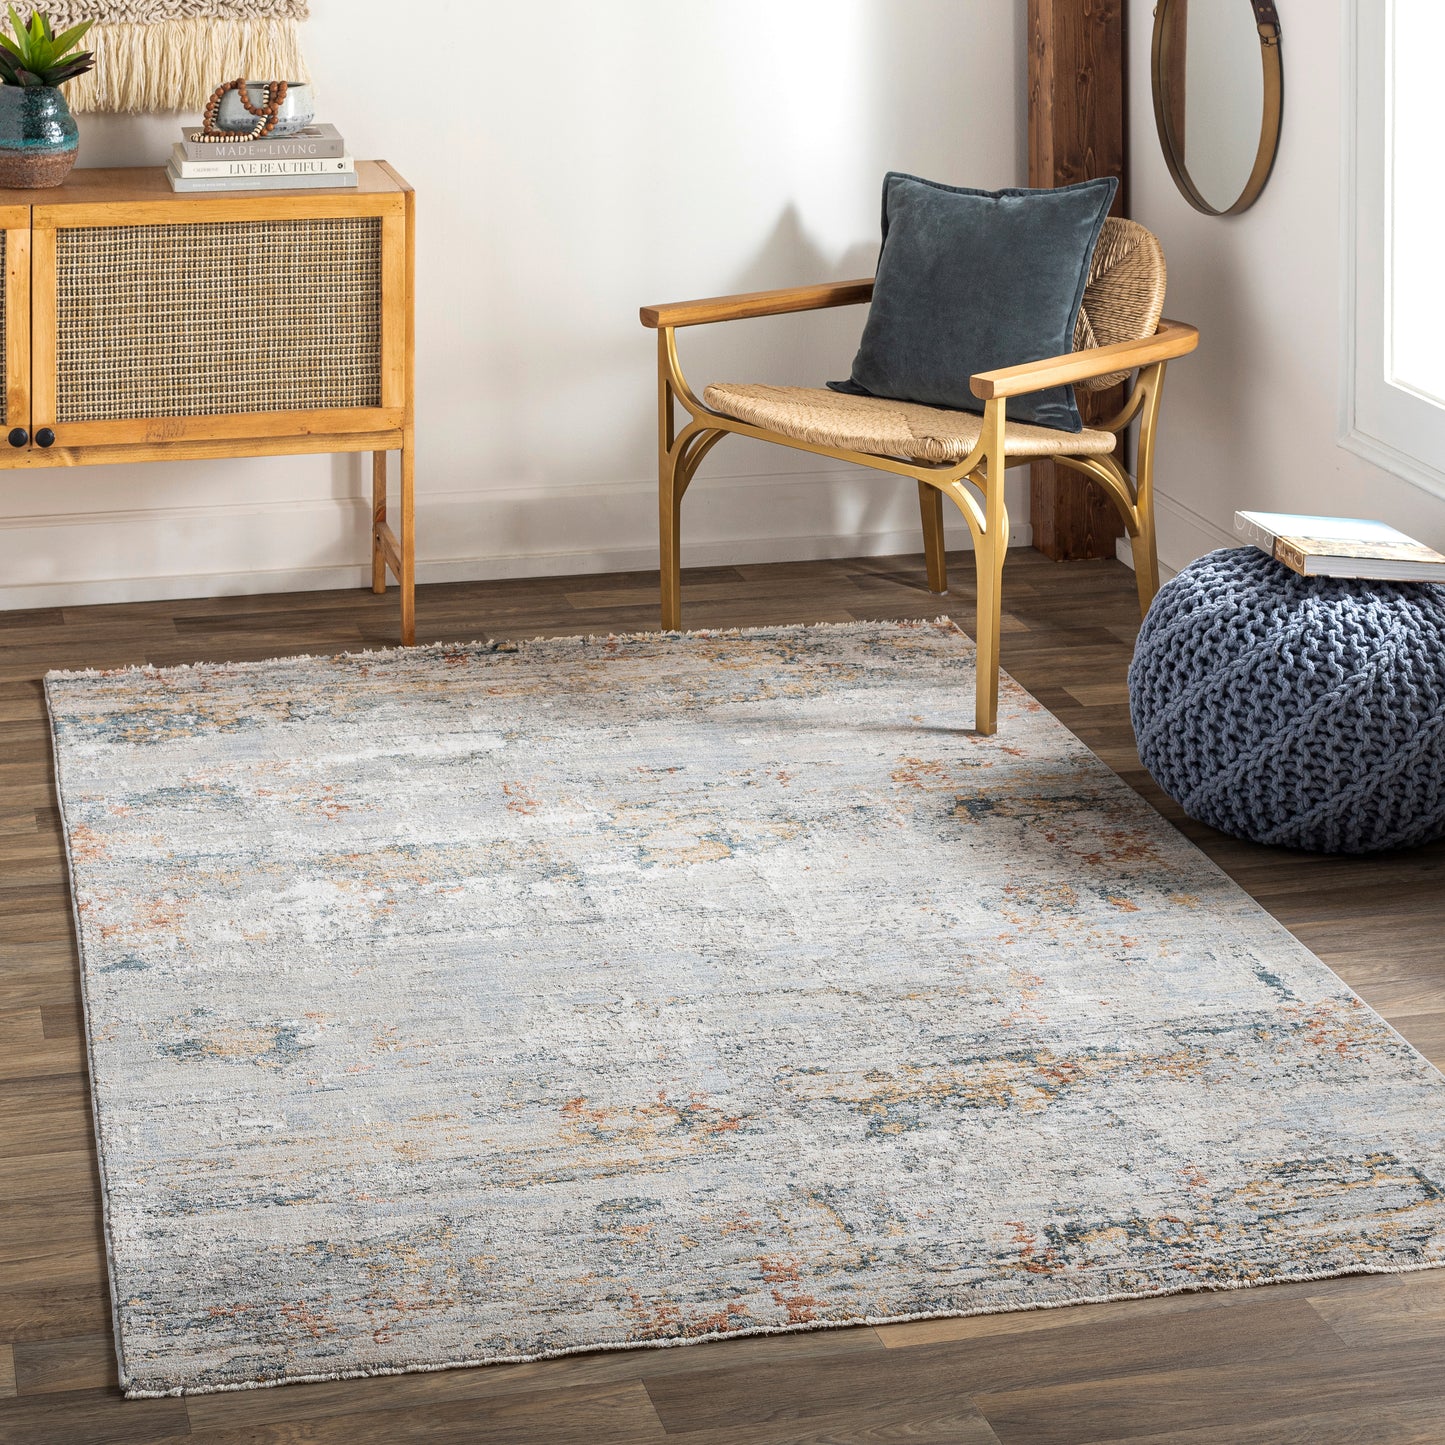 Laila 26560 Machine Woven Synthetic Blend Indoor Area Rug by Surya Rugs